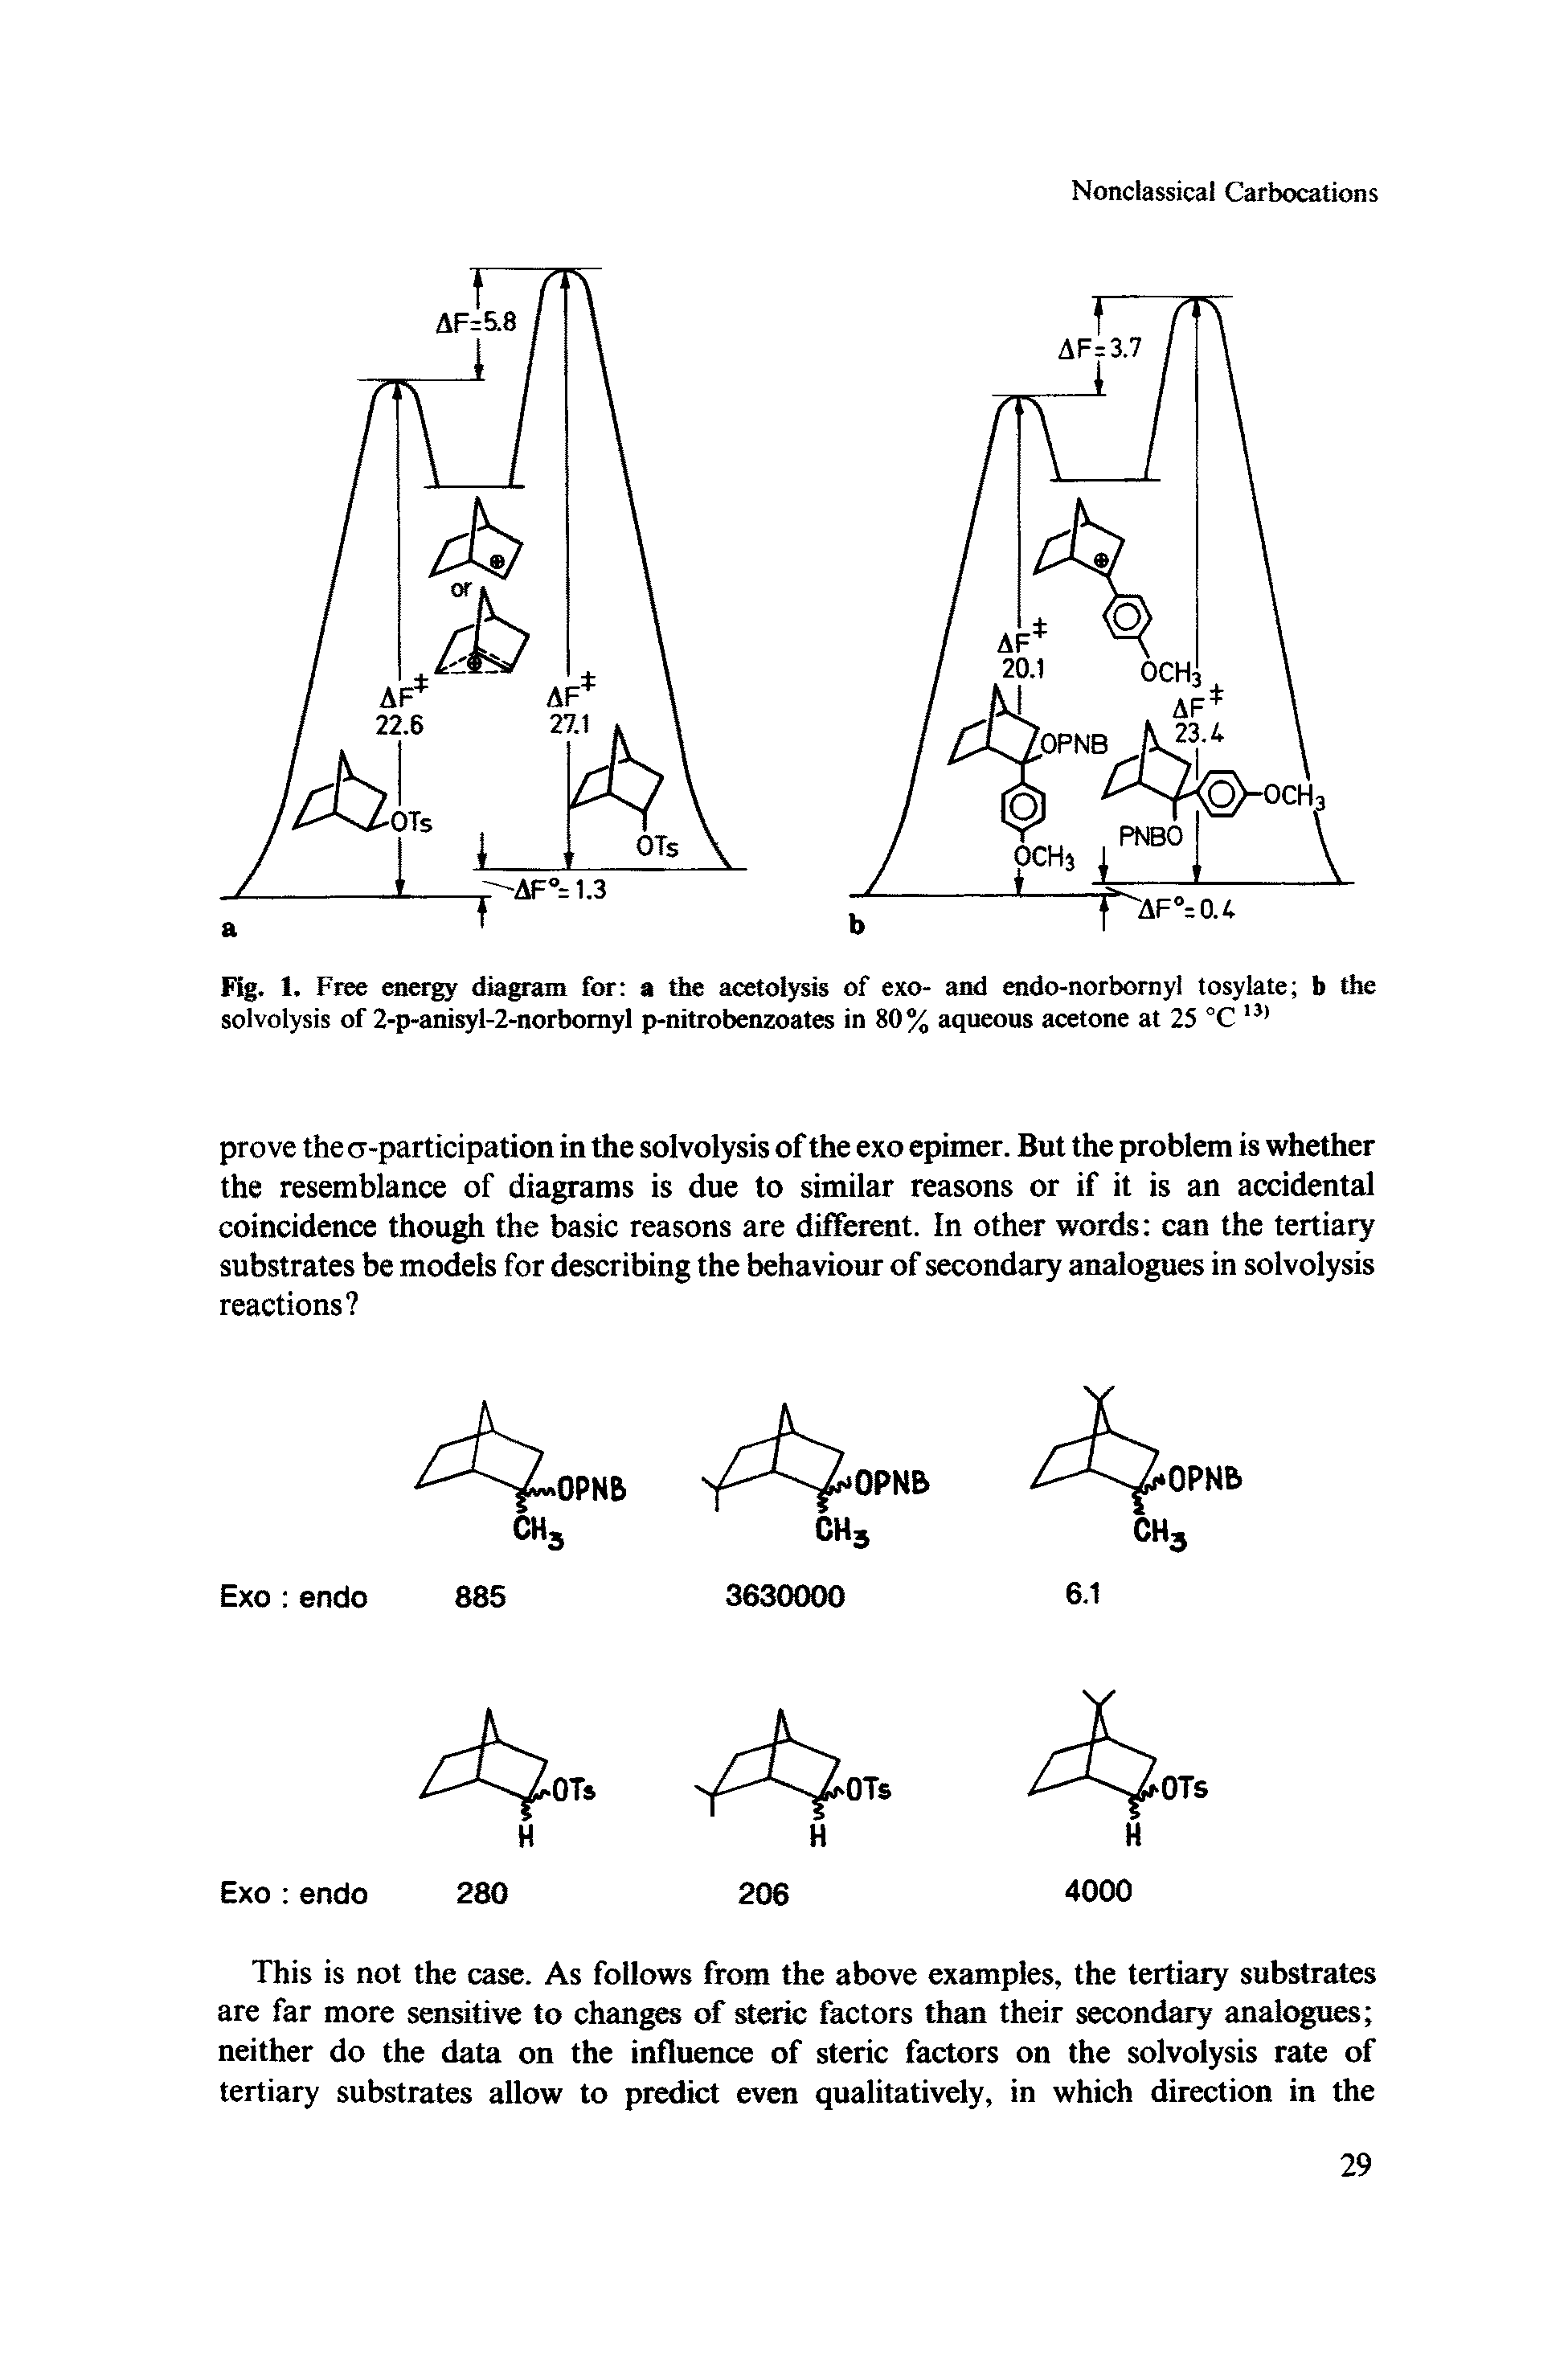 Fig. 1. Free energy diagram for a the acetolysis of exo- and endo-norbornyl tosylate b the solvolysis of 2-p-anisyl-2-norbomyl p-nitrobenzoates in 80% aqueous acetone at 25 °C...